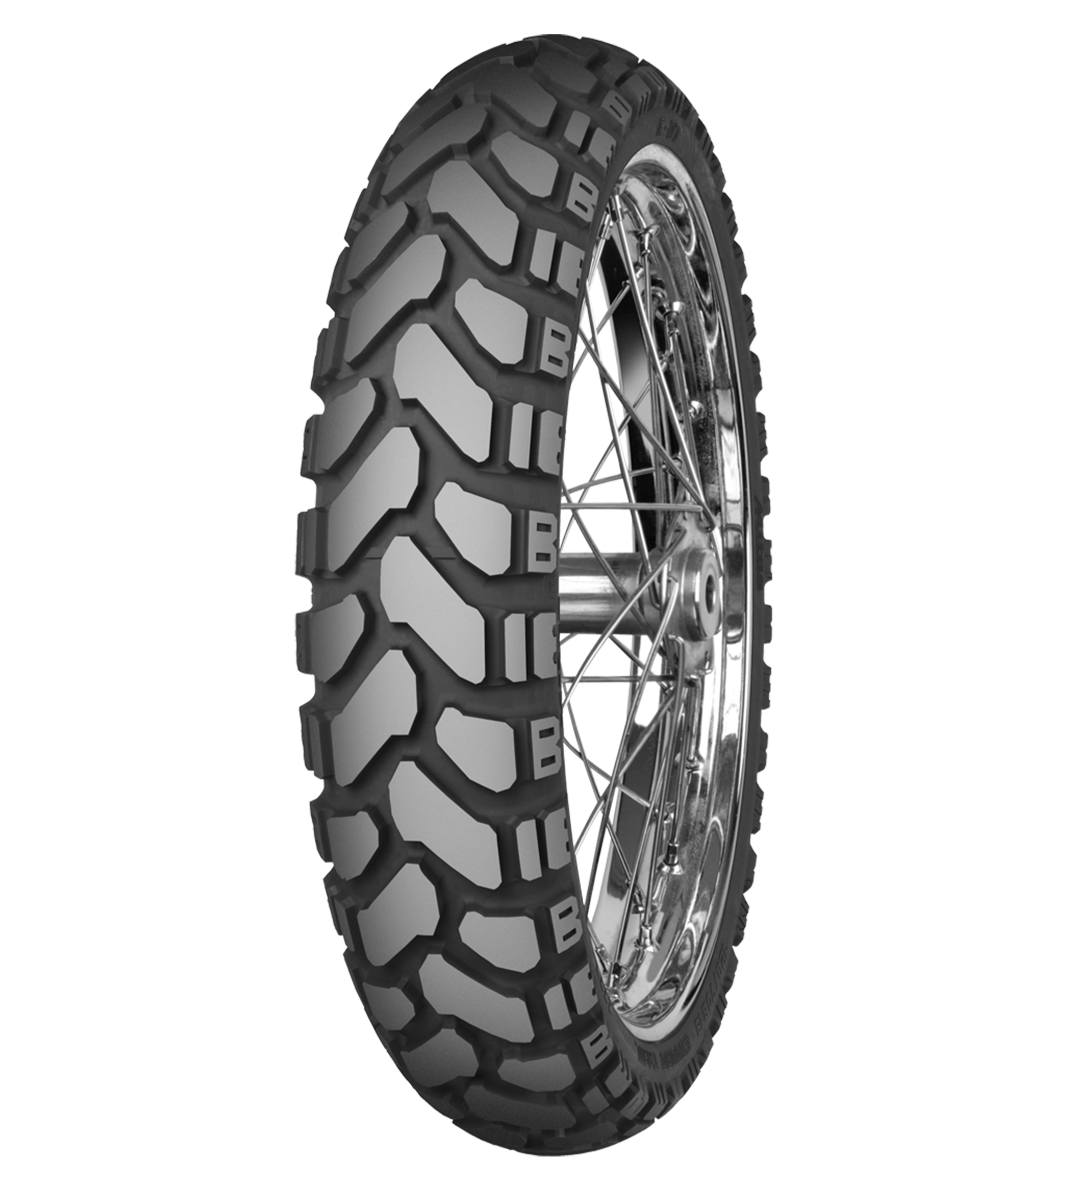 Mitas E-07+ ENDURO TRAIL 120/80B18 Trail ON Trail 62T No Stripe Tubeless Rear Tire, 224400, 120/80B18, Adventure Touring, E Series, E-07+ Enduro Trail, Rear, Trail, Trail ON, Tires - Imported and distributed in North & South America by Lindeco Genuine Powersports - Premier Powersports Equipment and Accessories for Motorcycle Enthusiasts, Professional Riders and Dealers.